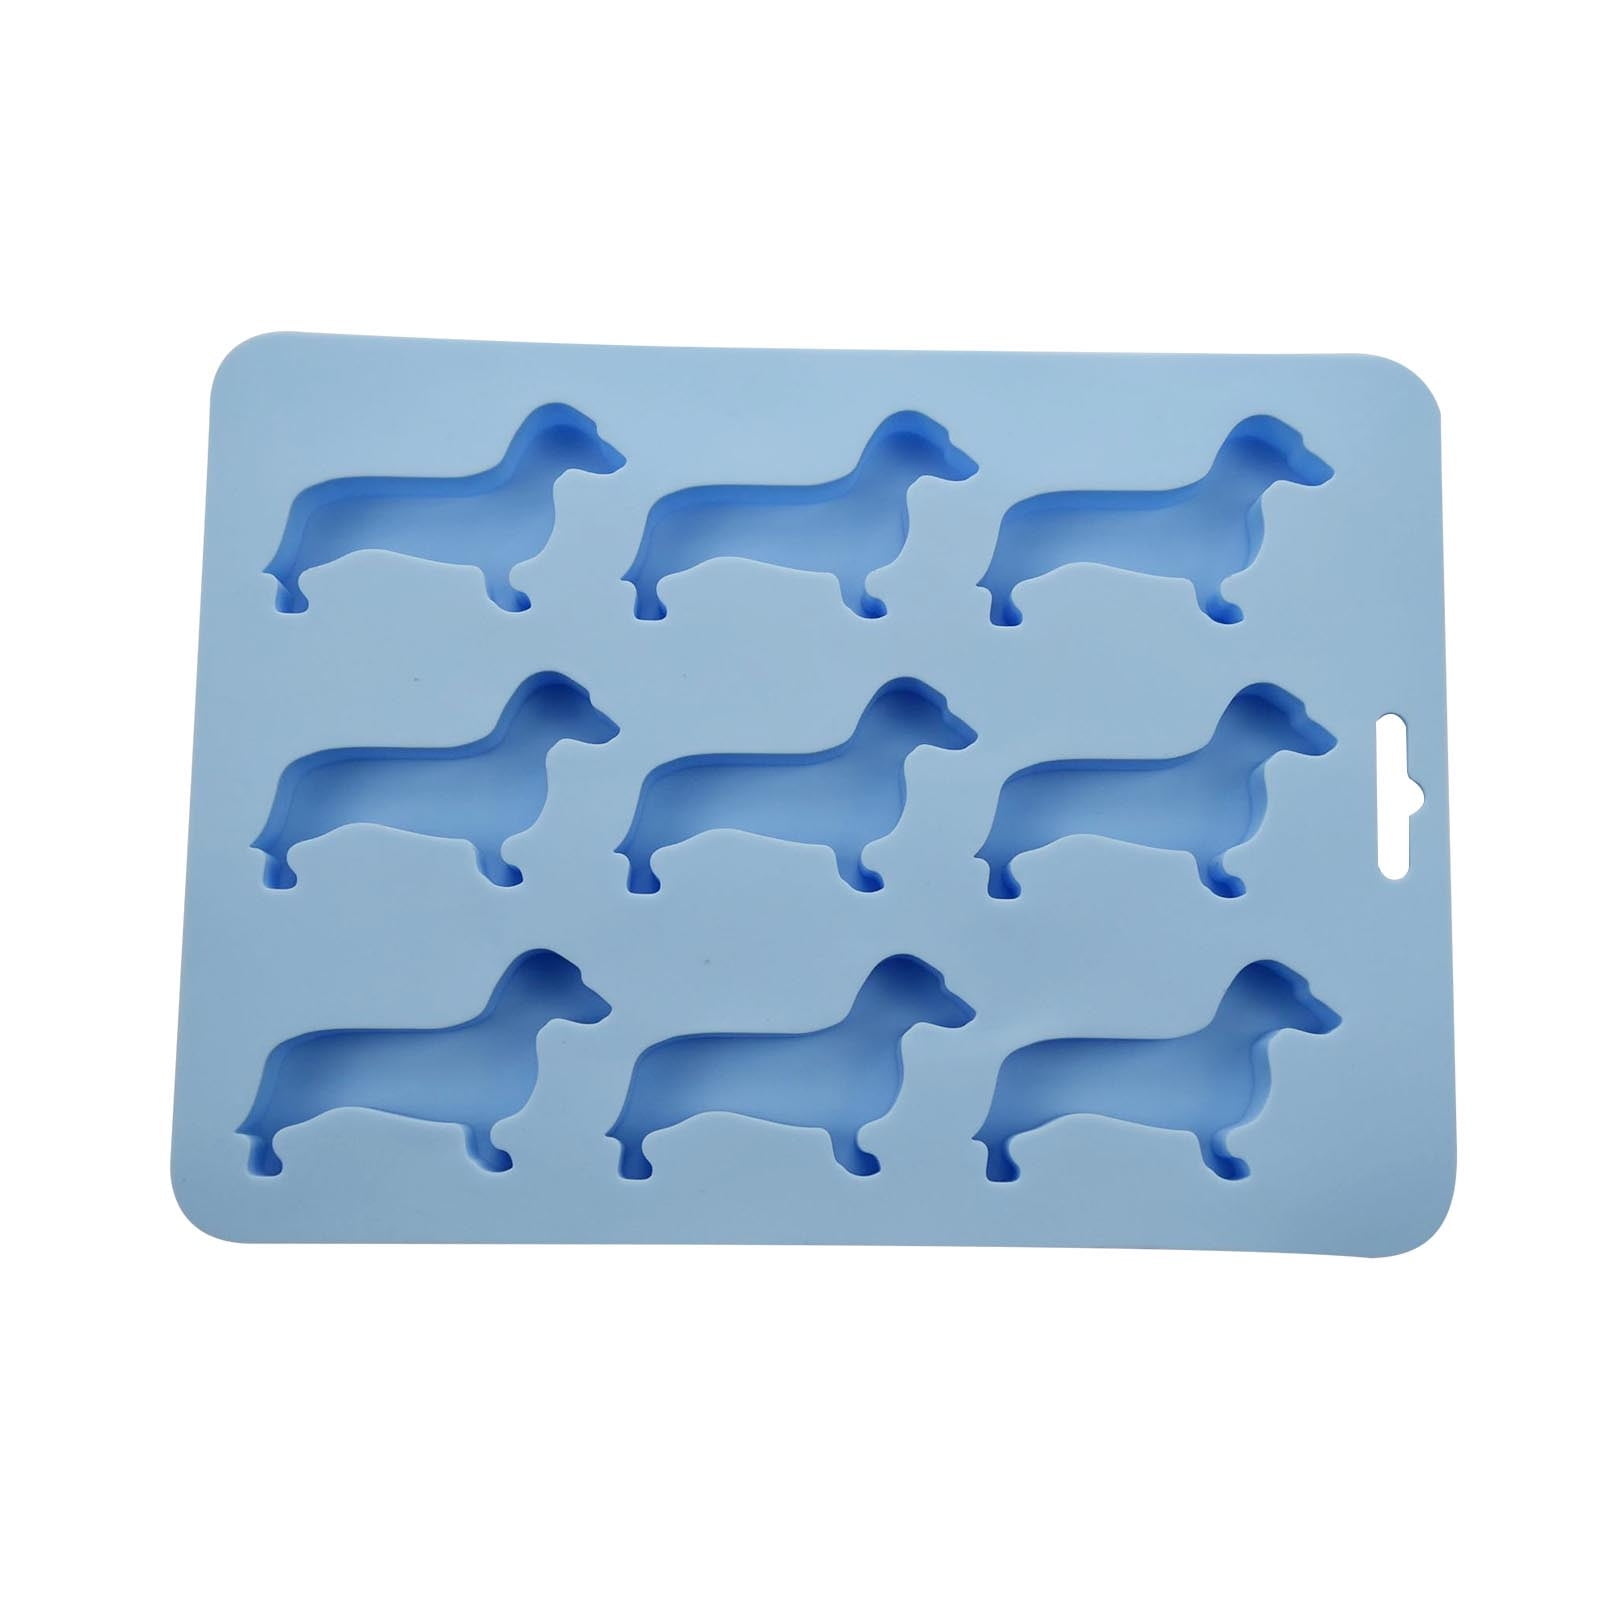 Wovilon Dachshund Dog Shaped Silicone Ice And Tray For Drink Ice Maker  Candy Chocolate Fondant Cupcake Cake Decoration Baking Birthday Baby Show  Kitchen Utensils Set Kitchen Gadgets 